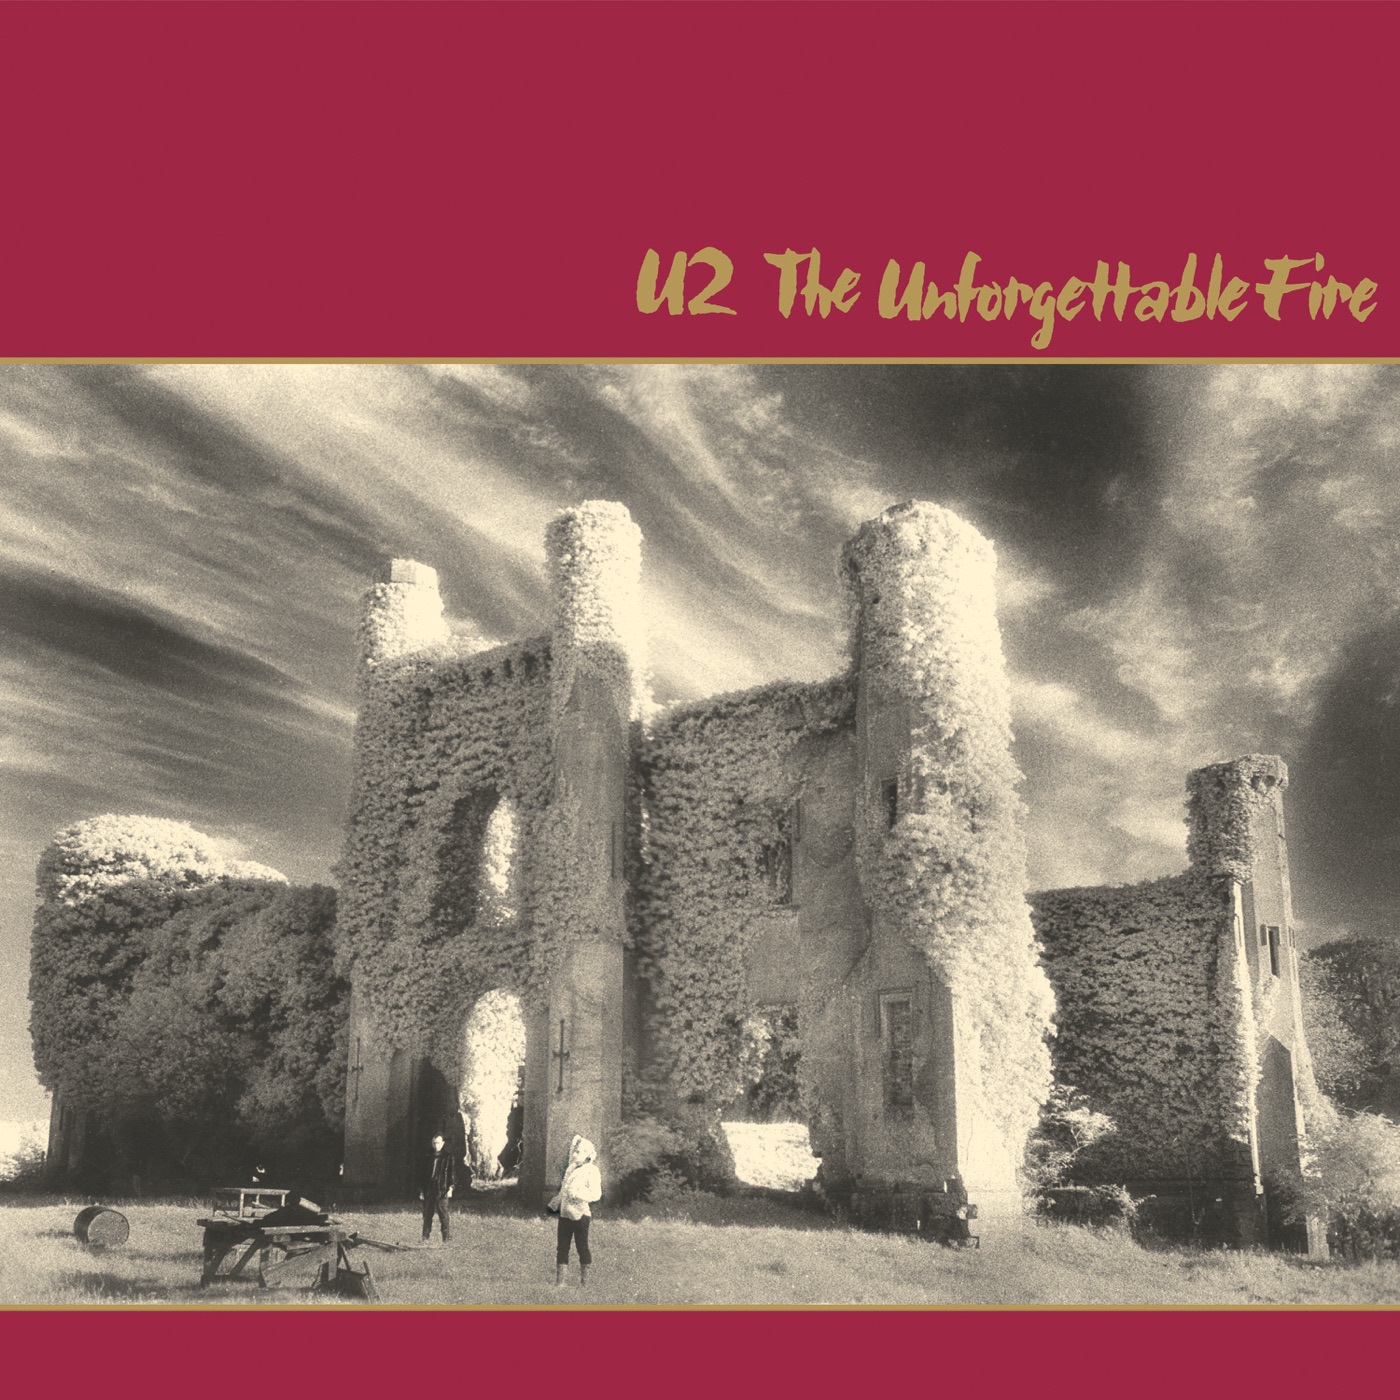 The Unforgettable Fire (Remastered) by U2